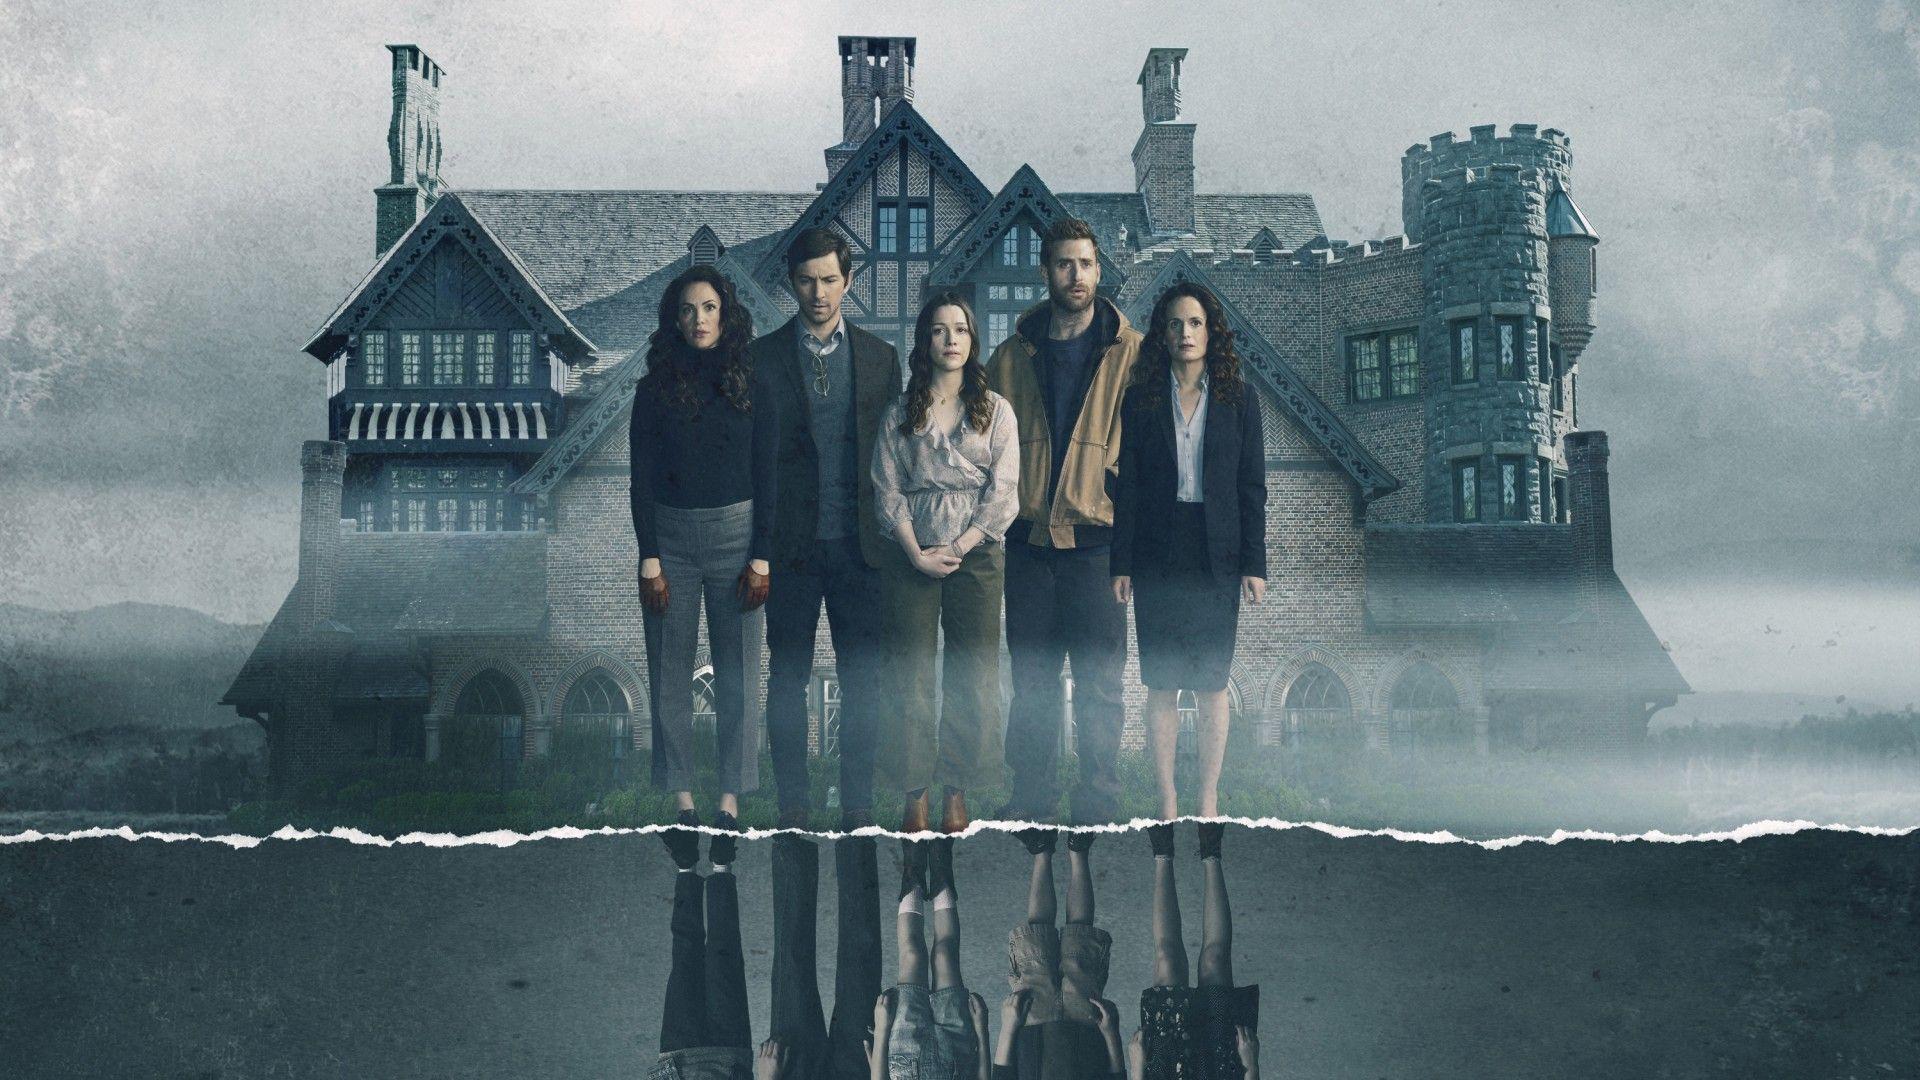 Download 1920x1080 The Haunting Of Hill House, Tv Series Wallpaper